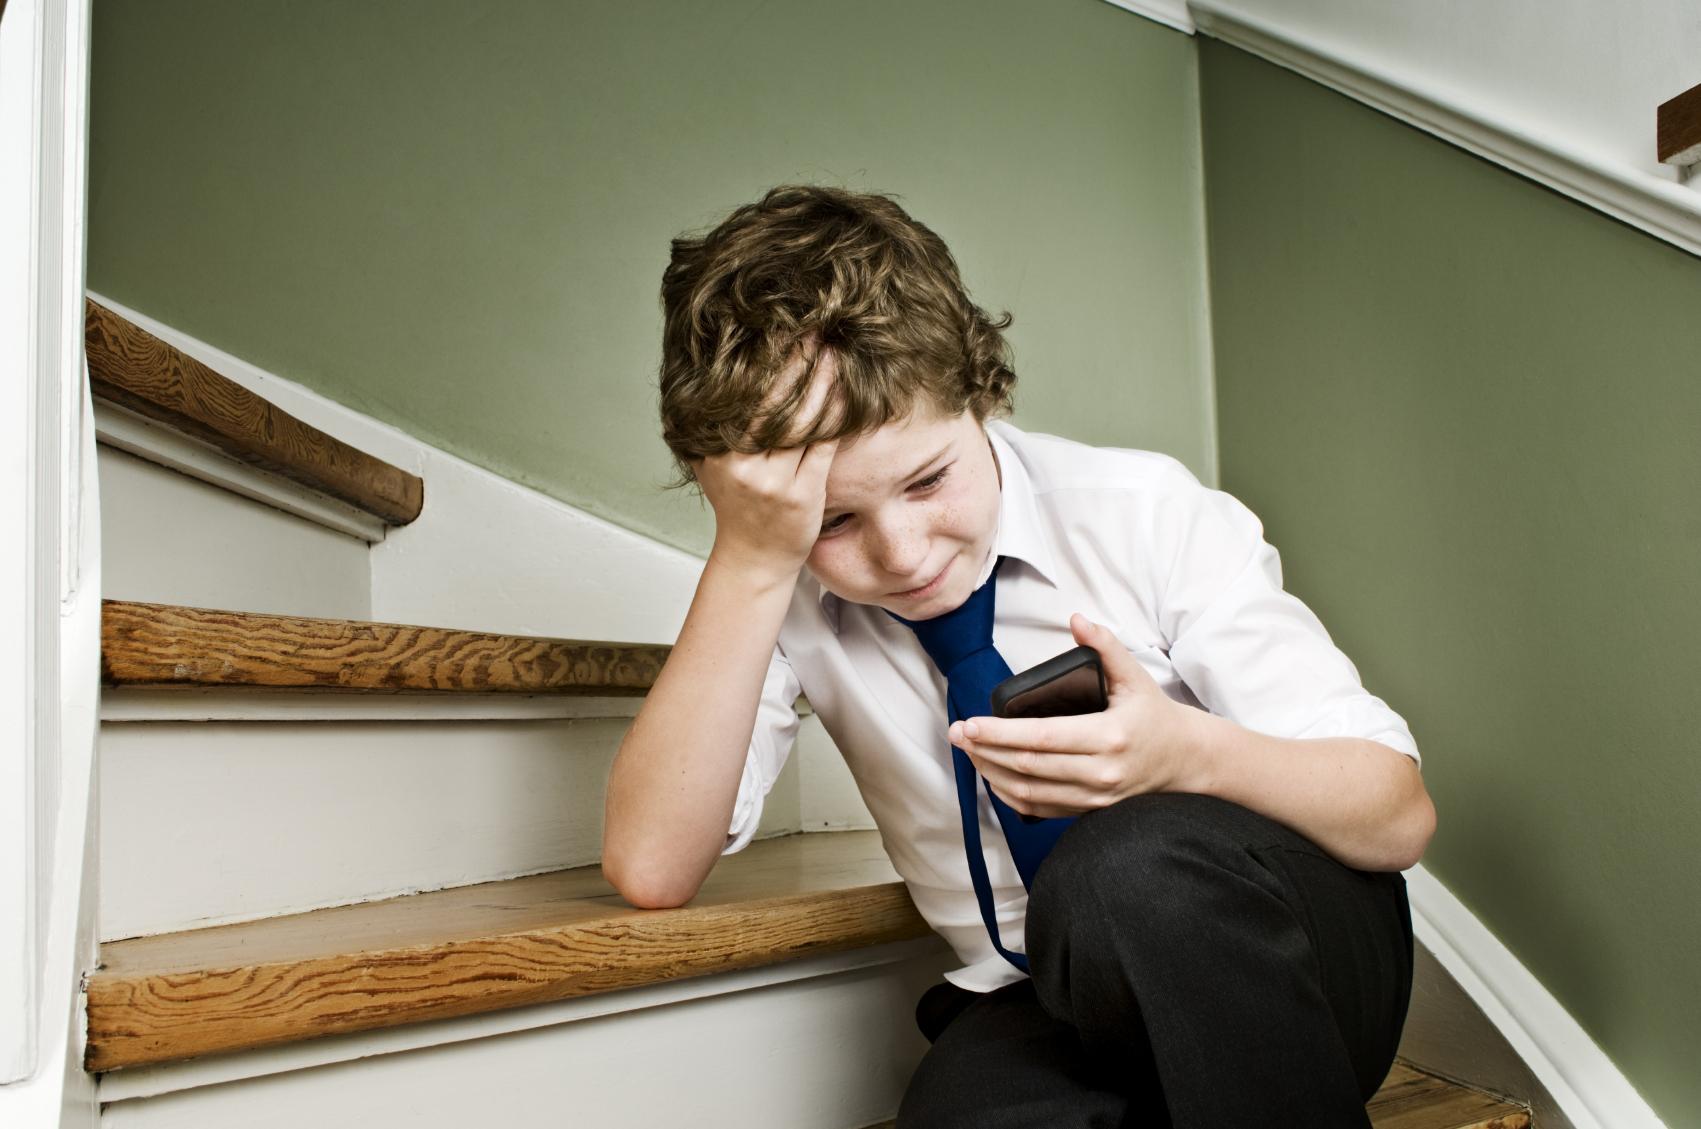 Primary school principals report significant numbers of children presenting with serious mental health difficulties